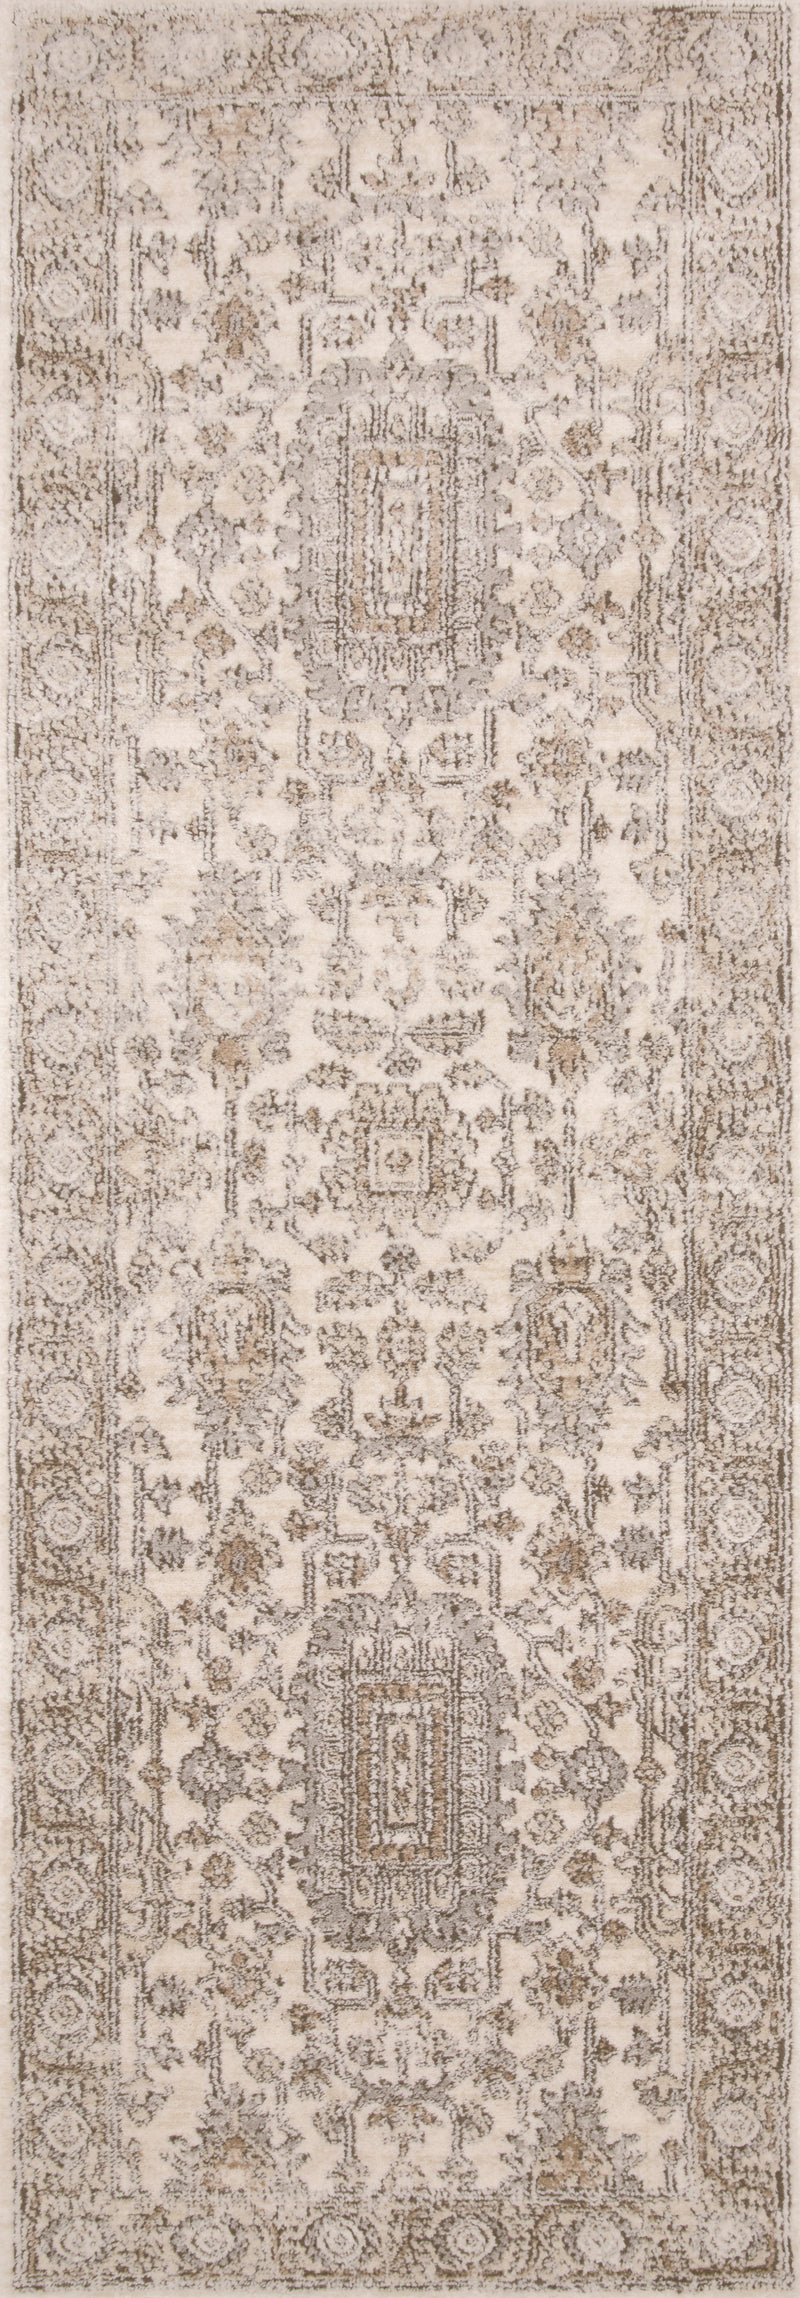 media image for Teagan Rug in Ivory / Sand by Loloi II 24